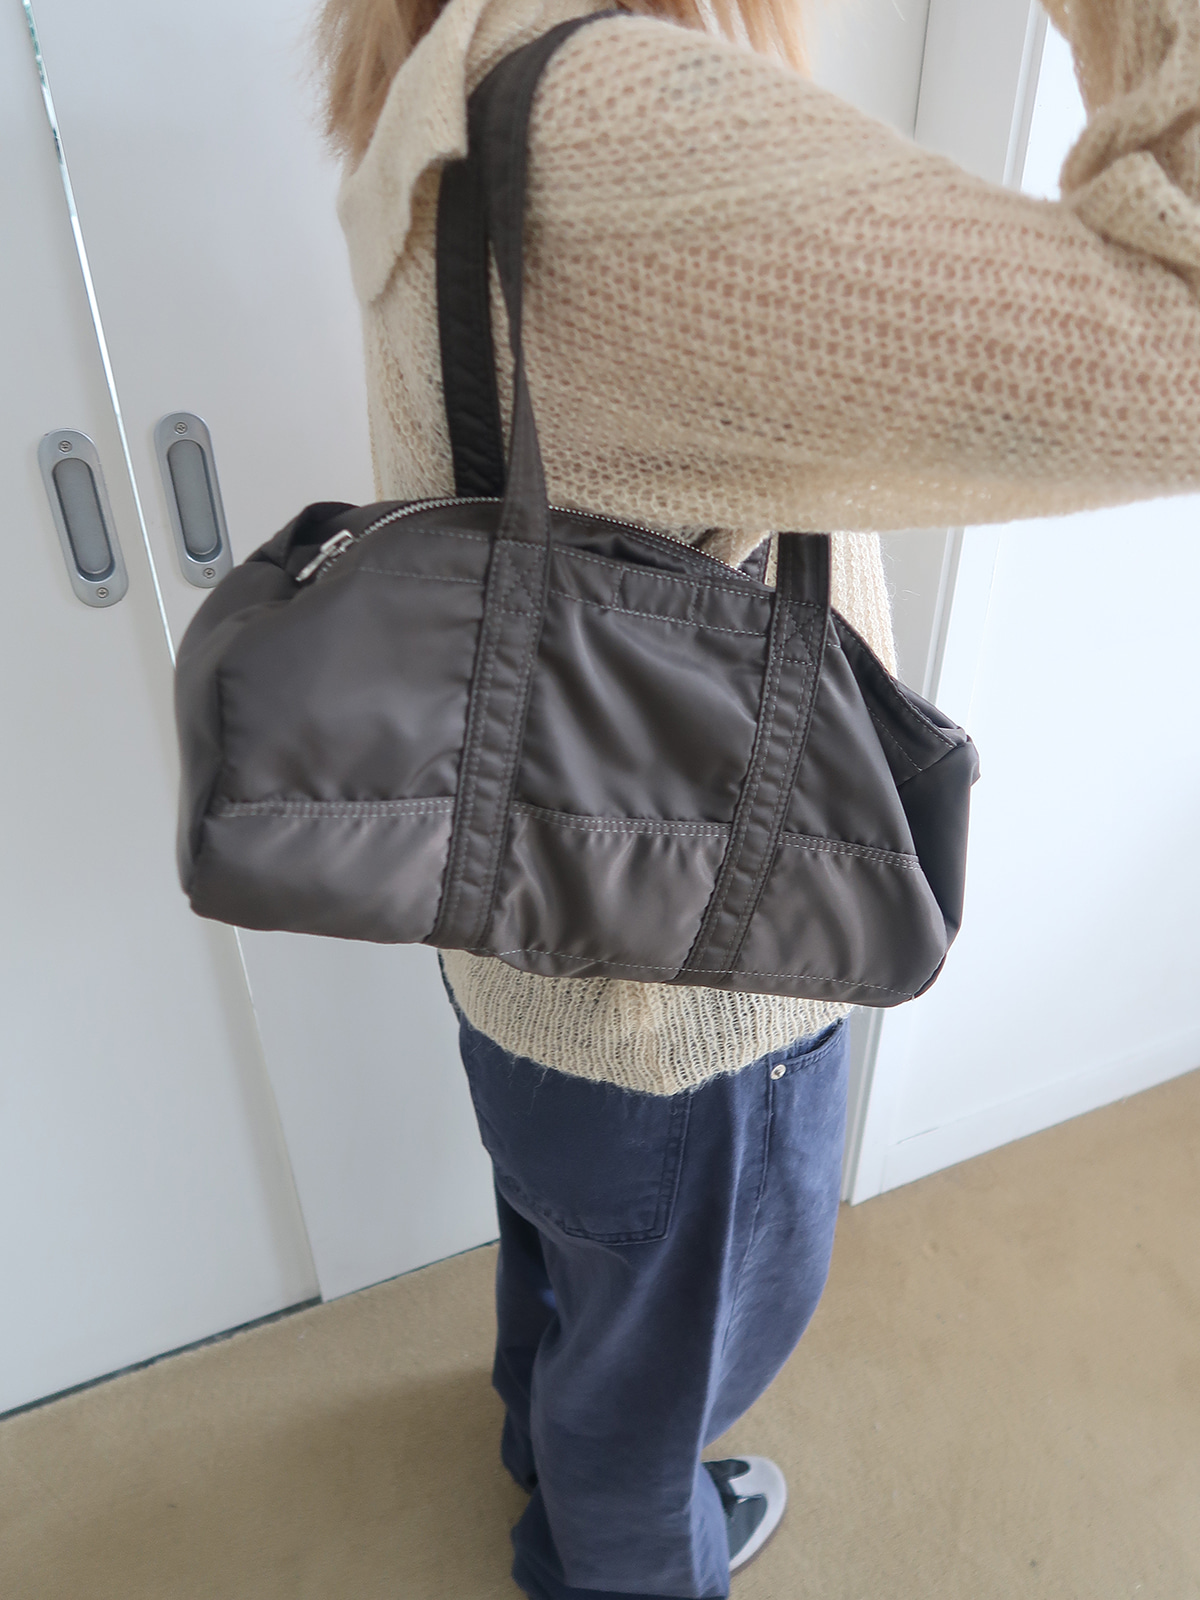 casual round bag